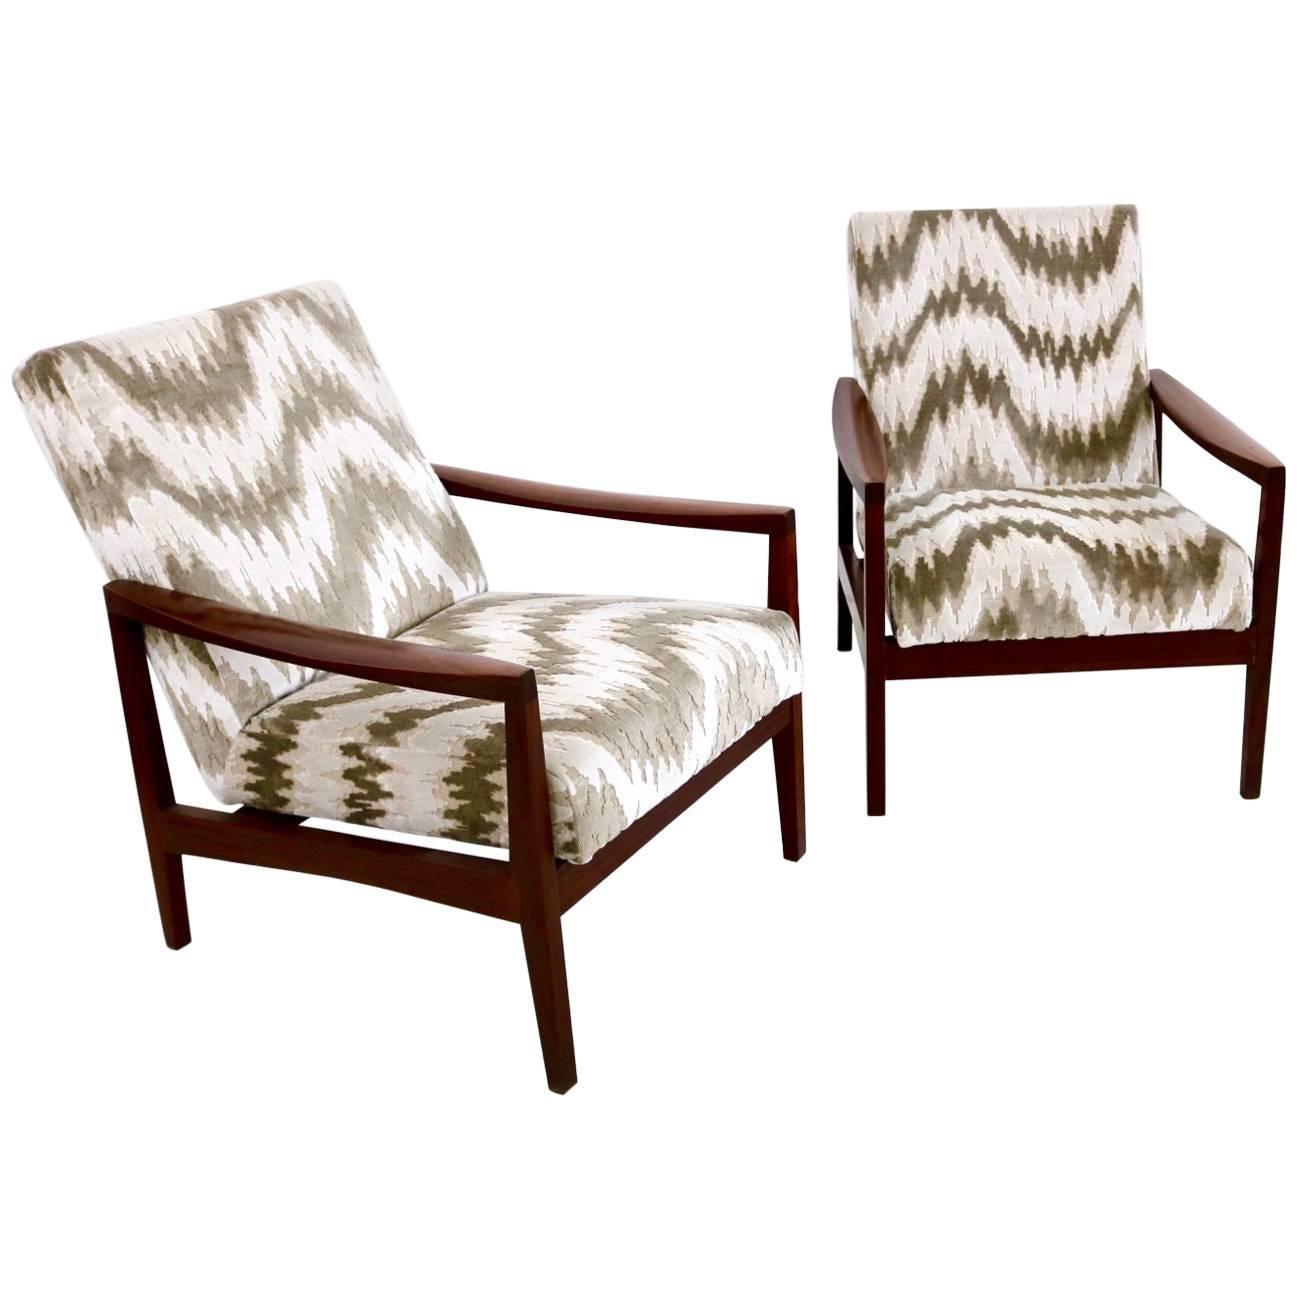 Pair of Midcentury Wood and Patterned Beige and White Fabric Armchairs, Italy